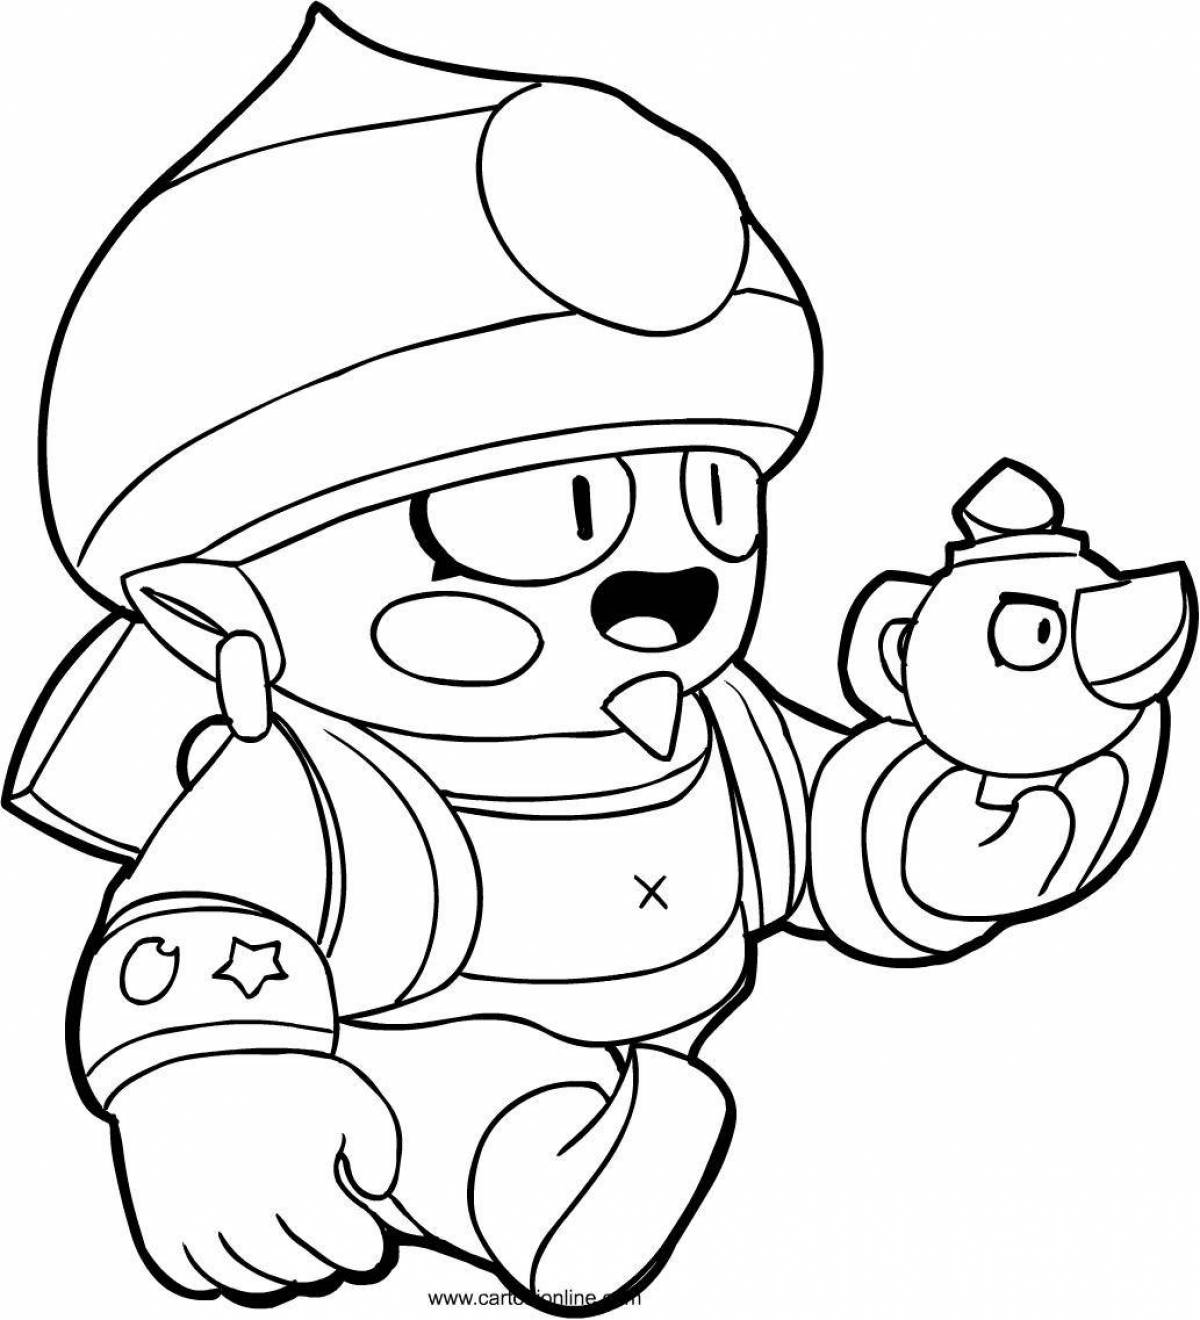 Brawlstars exciting coloring pages